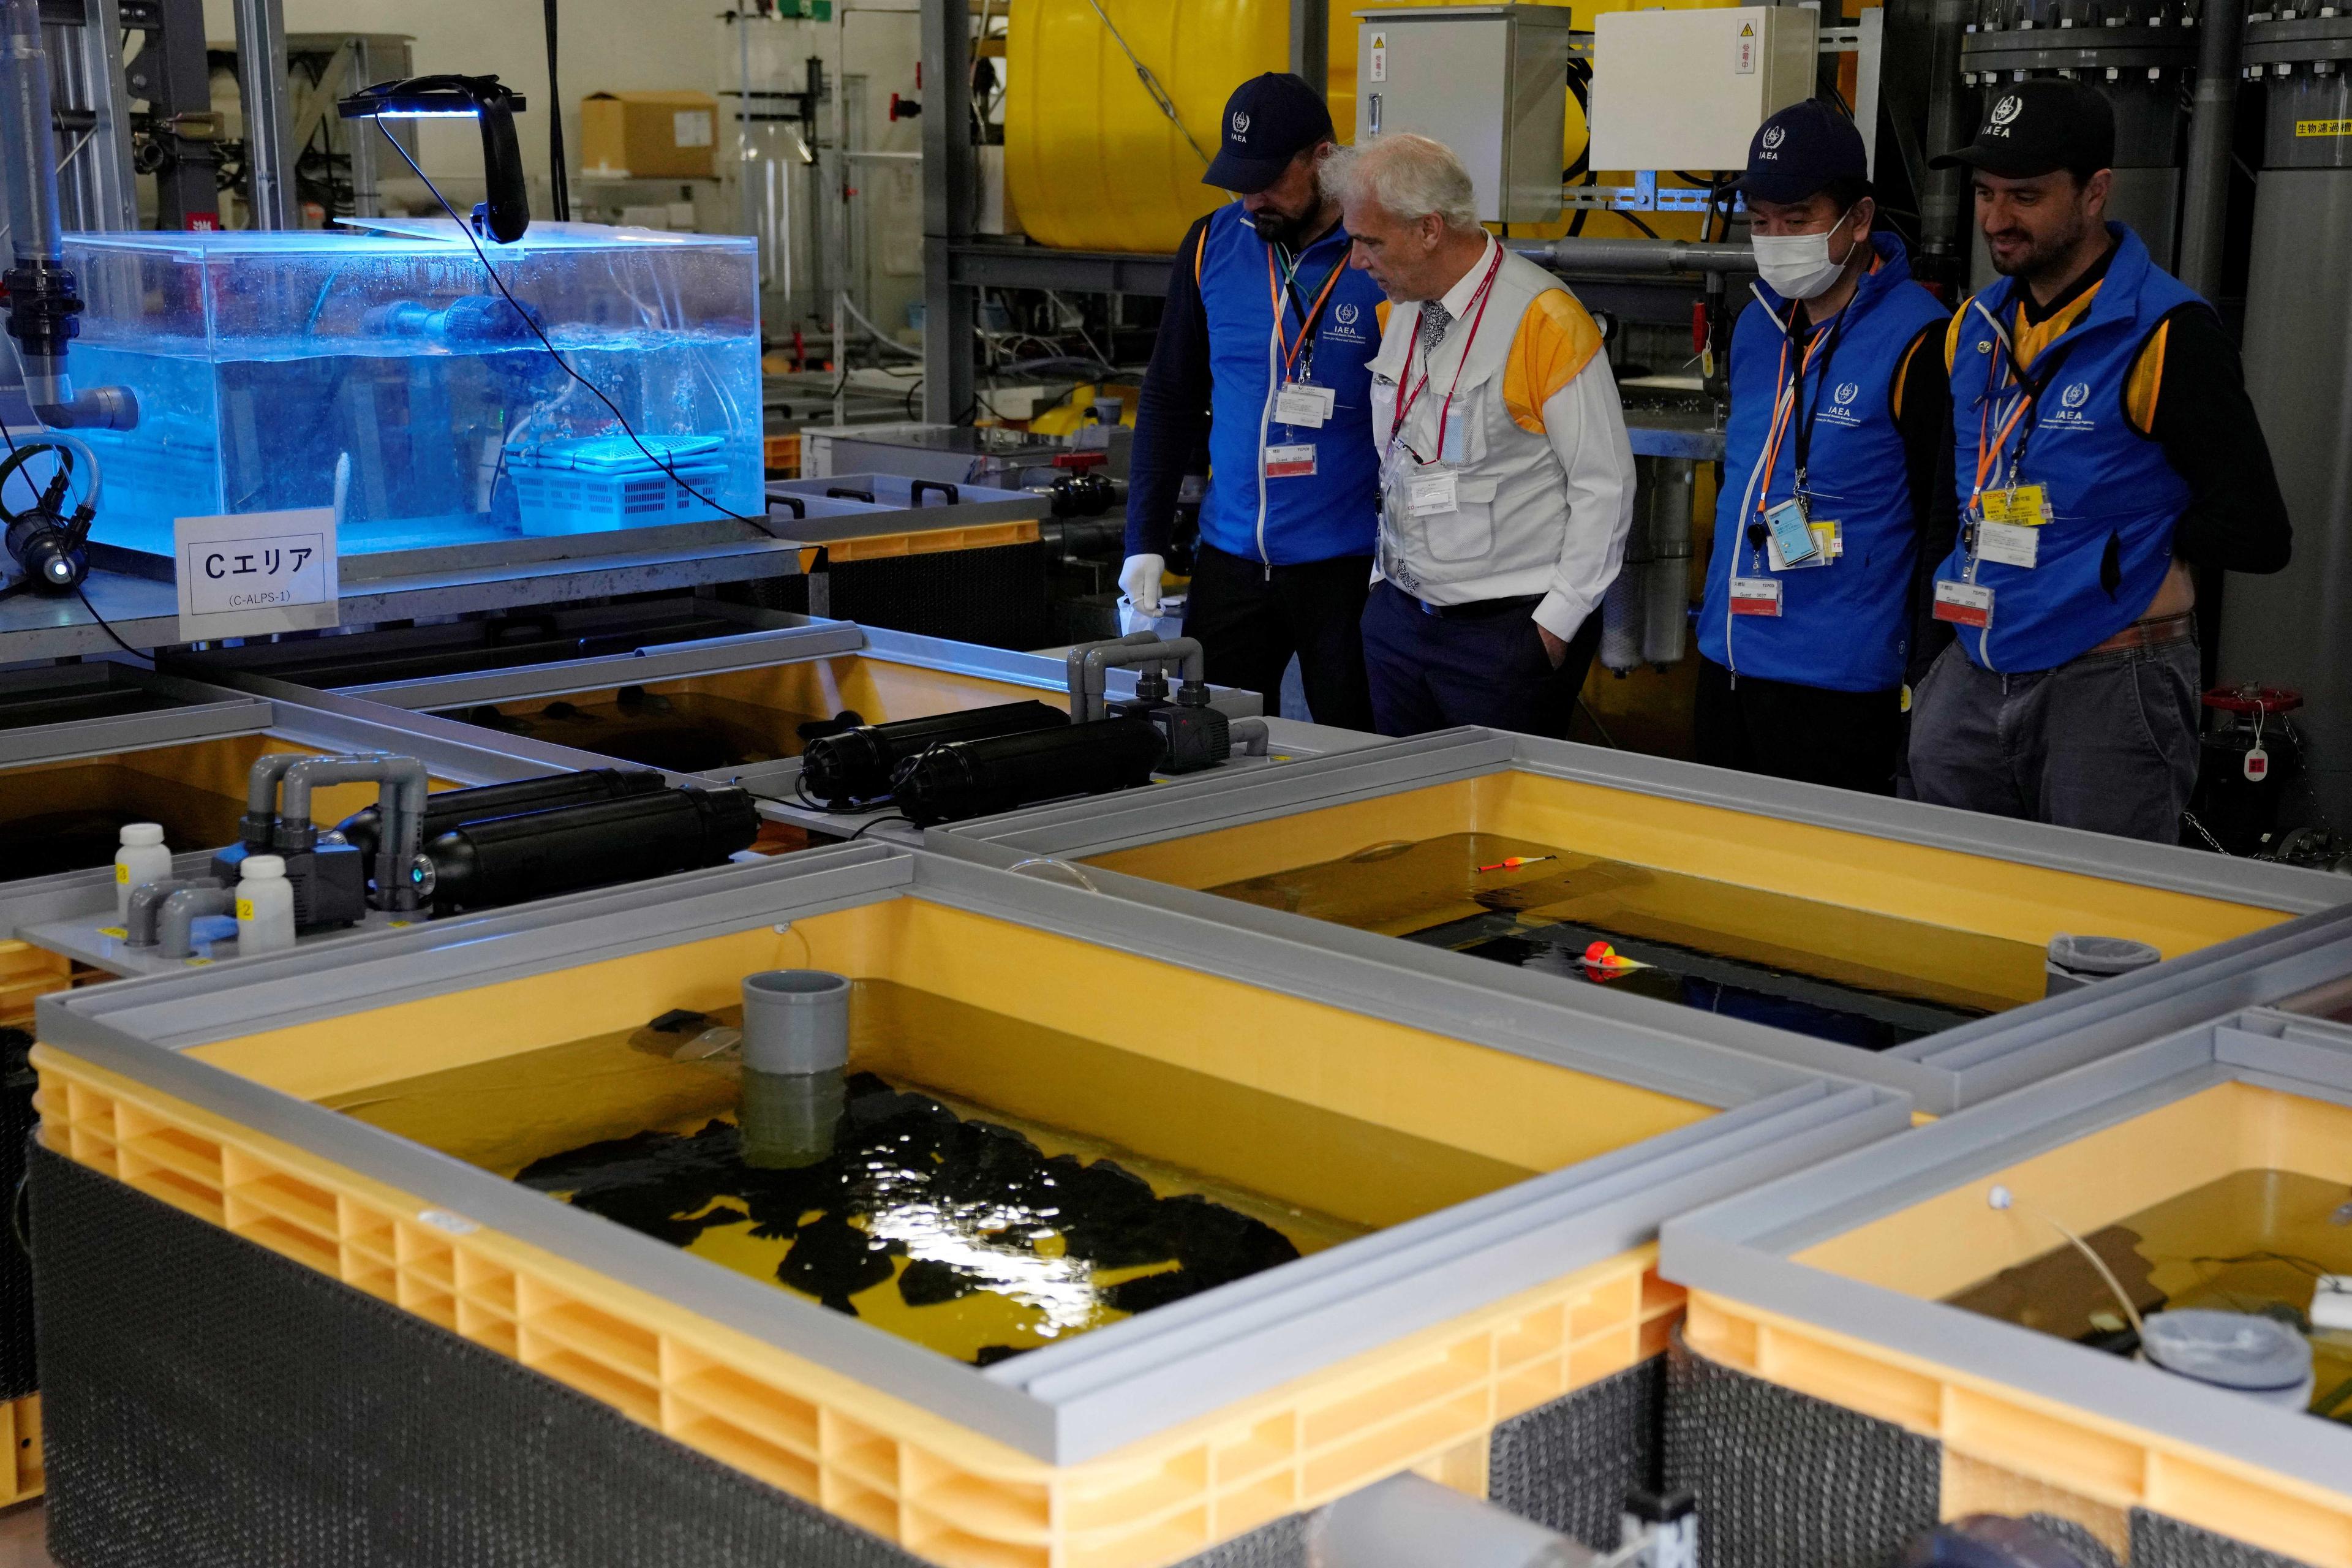 Members of the International Atomic Energy Agency, watch fish tanks on an experience with treated wastewater set up at the damaged Fukushima nuclear power plant in Okuma, northeastern Japan, July 5. Photo: Reuters